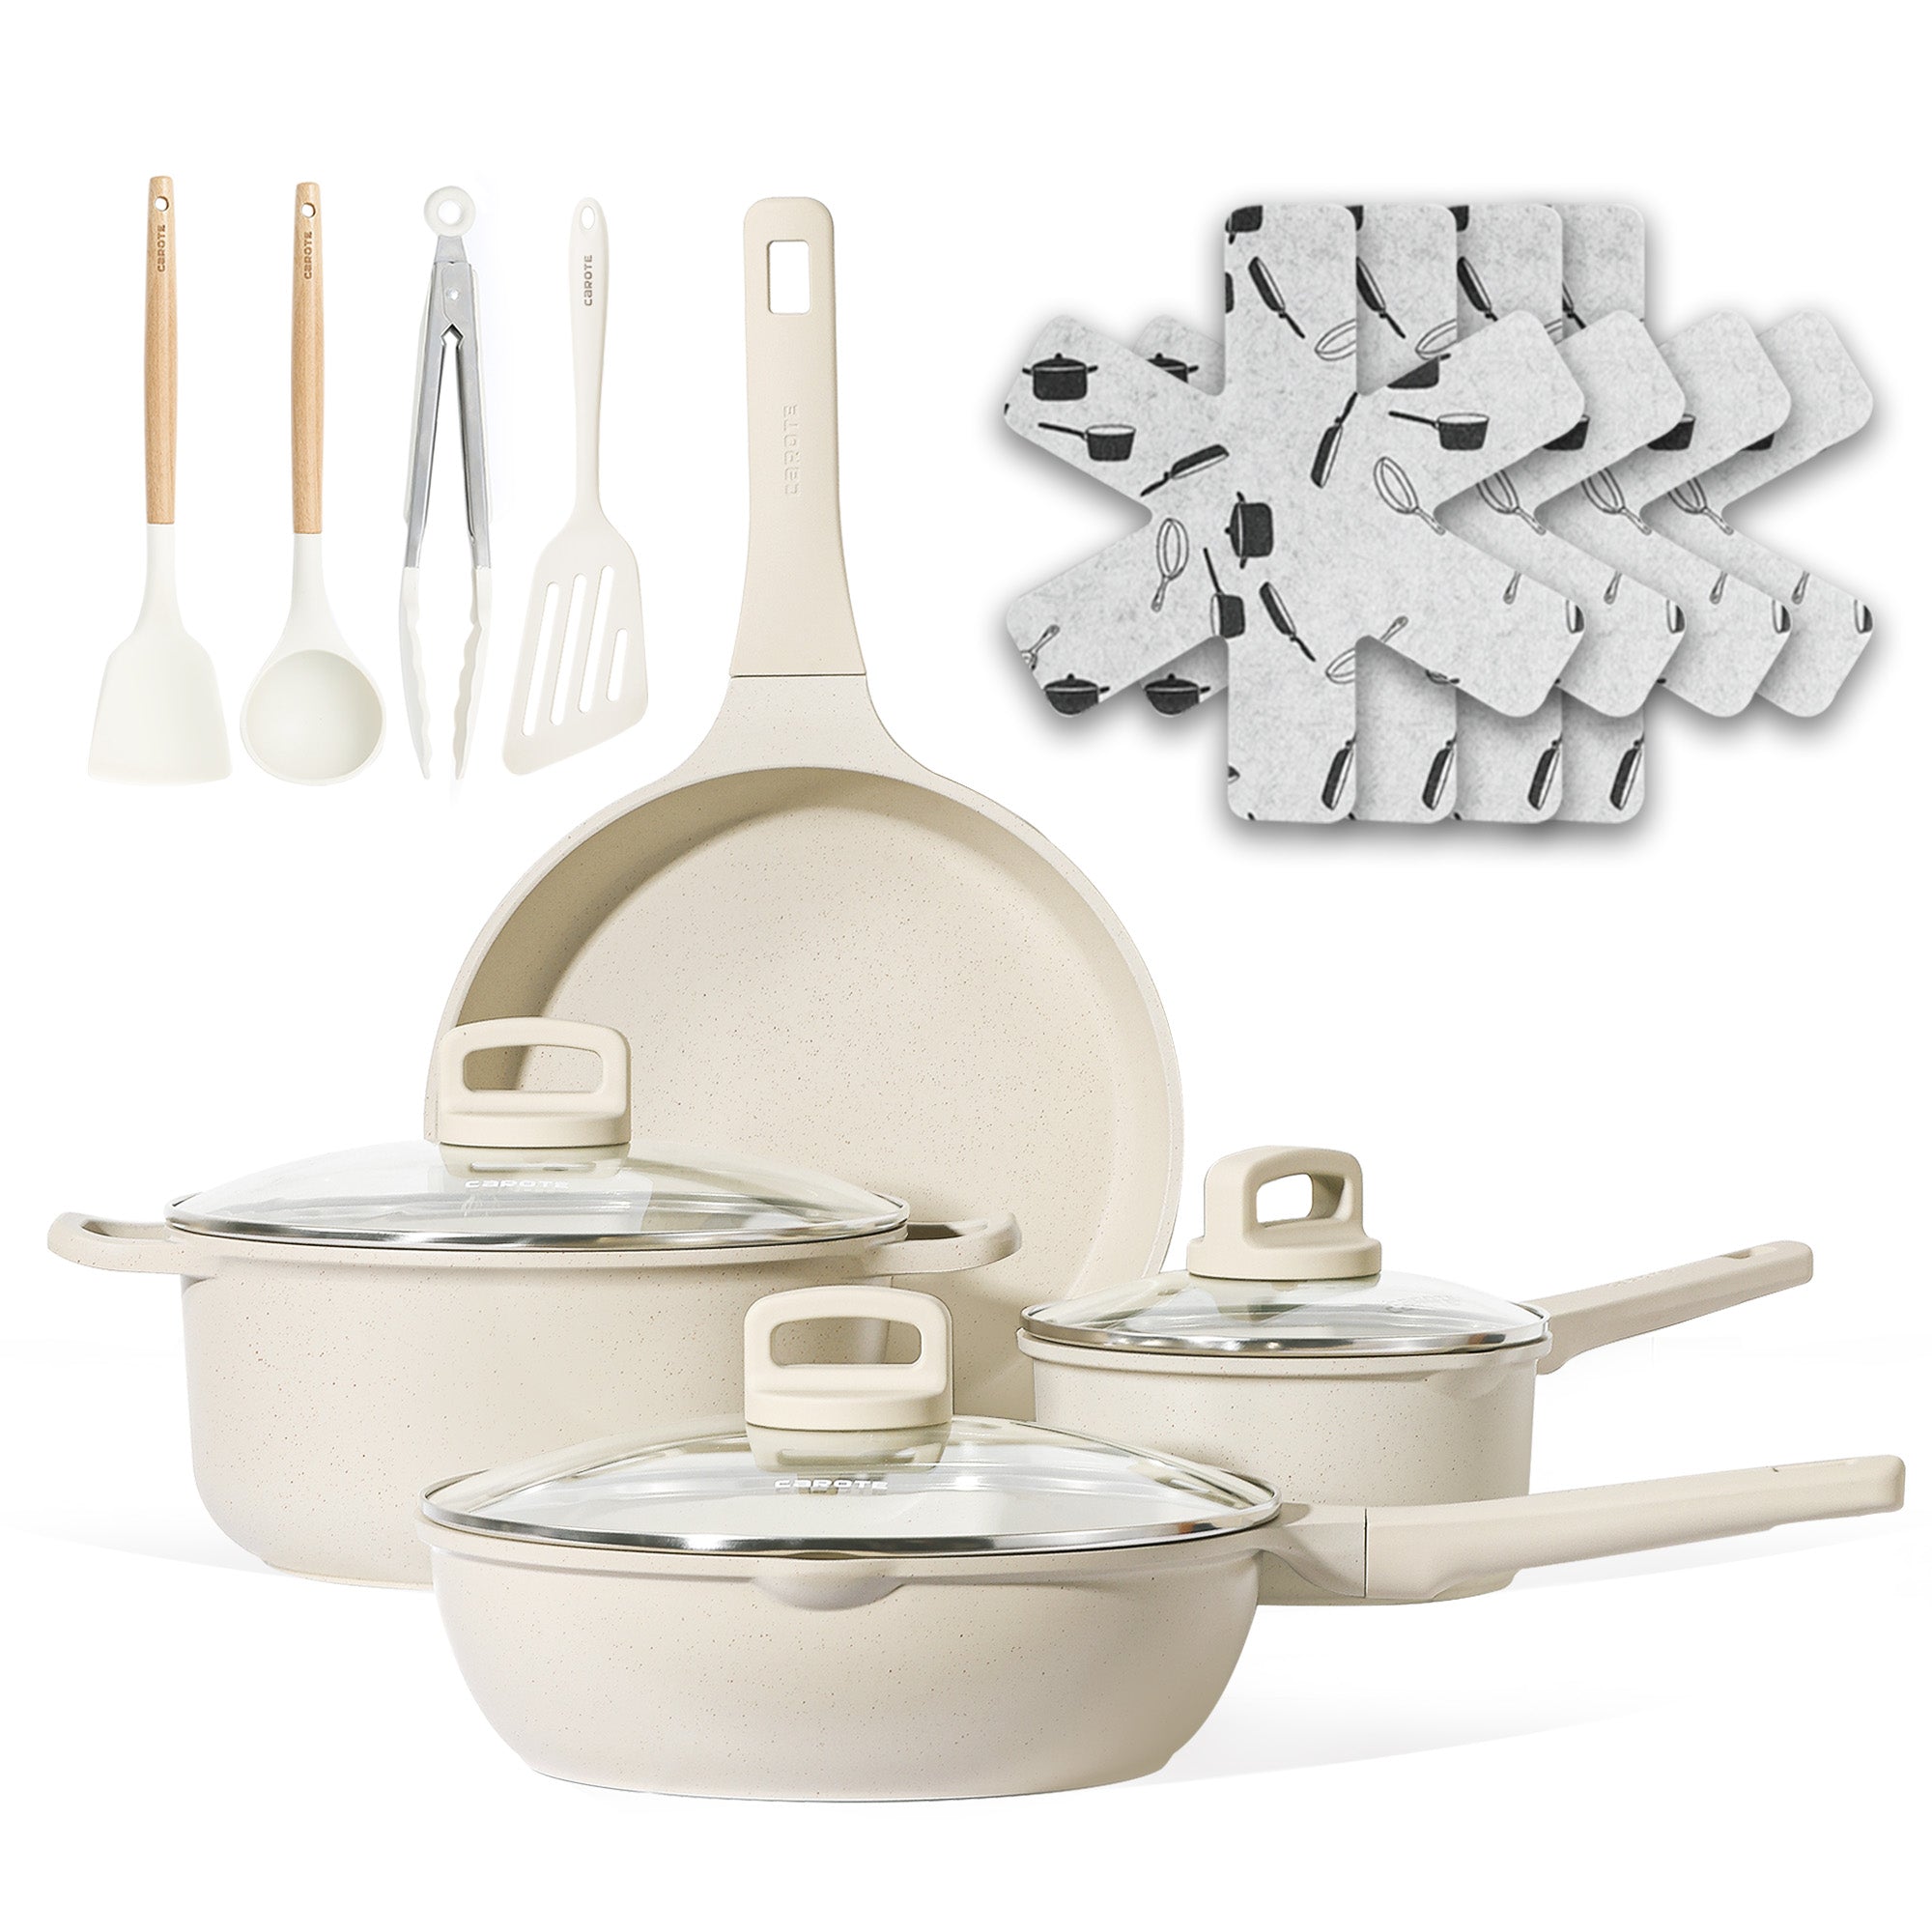 CAROTE Pots and Pans Set Nonstick, by Lulu